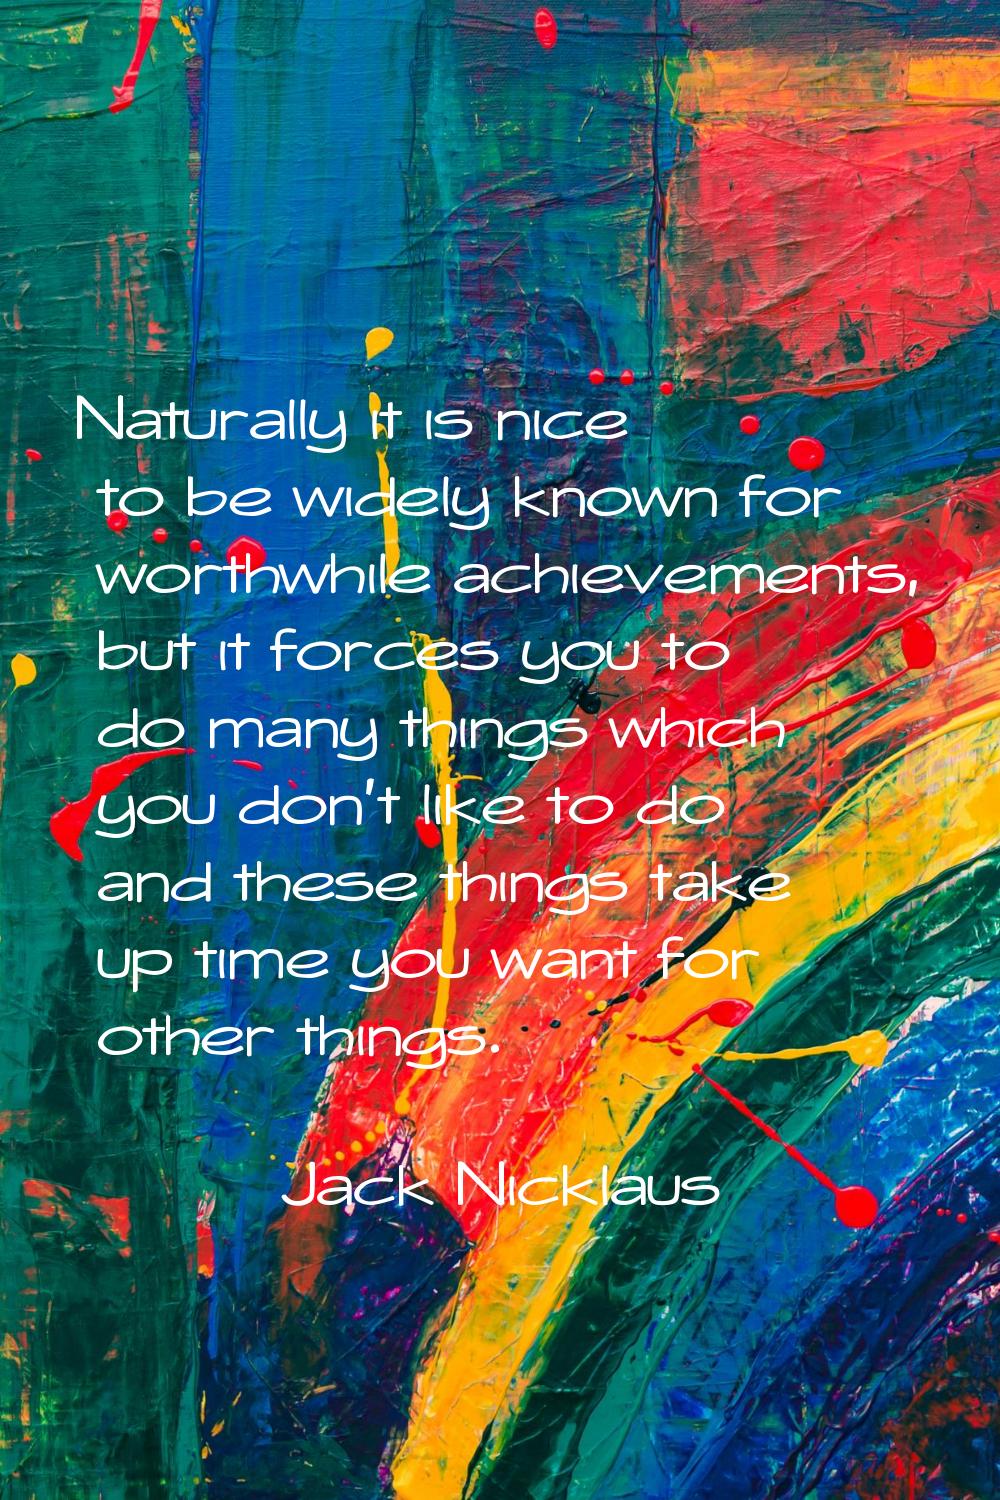 Naturally it is nice to be widely known for worthwhile achievements, but it forces you to do many t